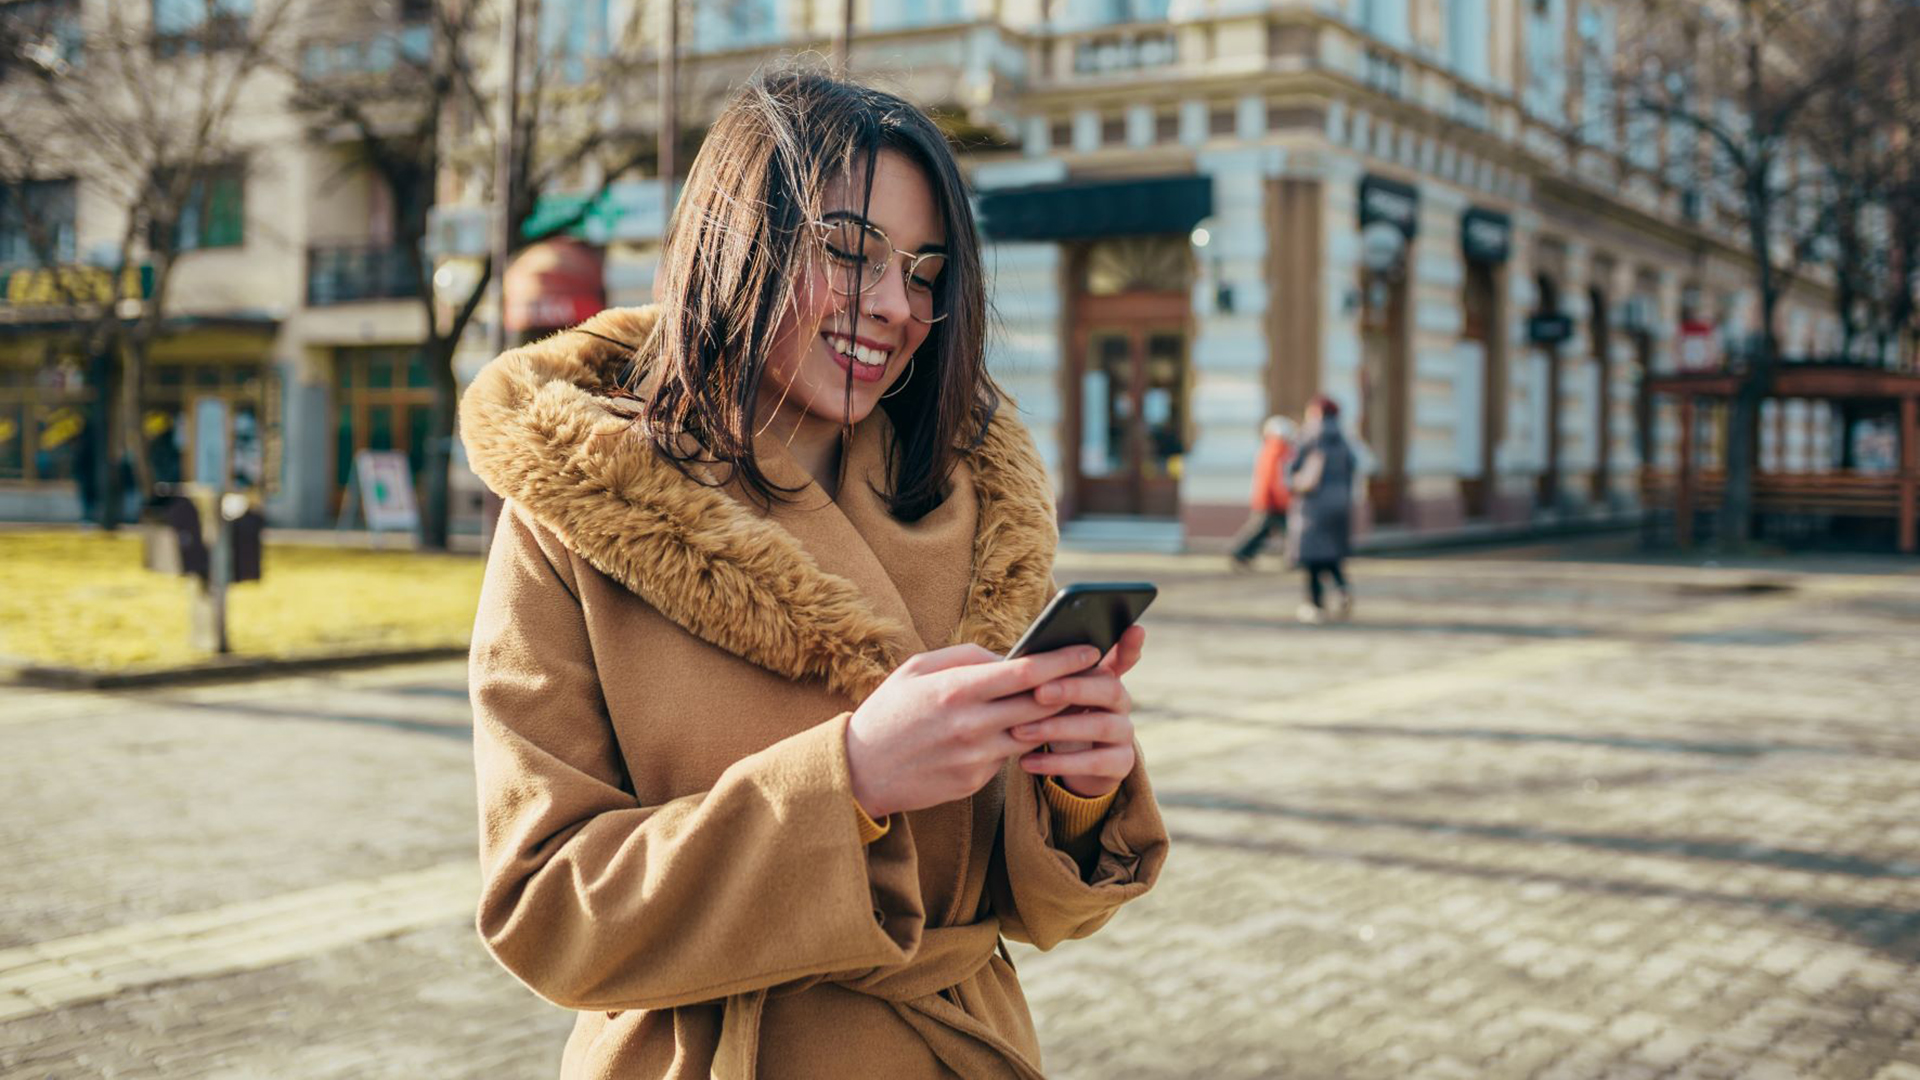 A young woman wearing a brown winter jacket reacts happily to a message she received on her phone.